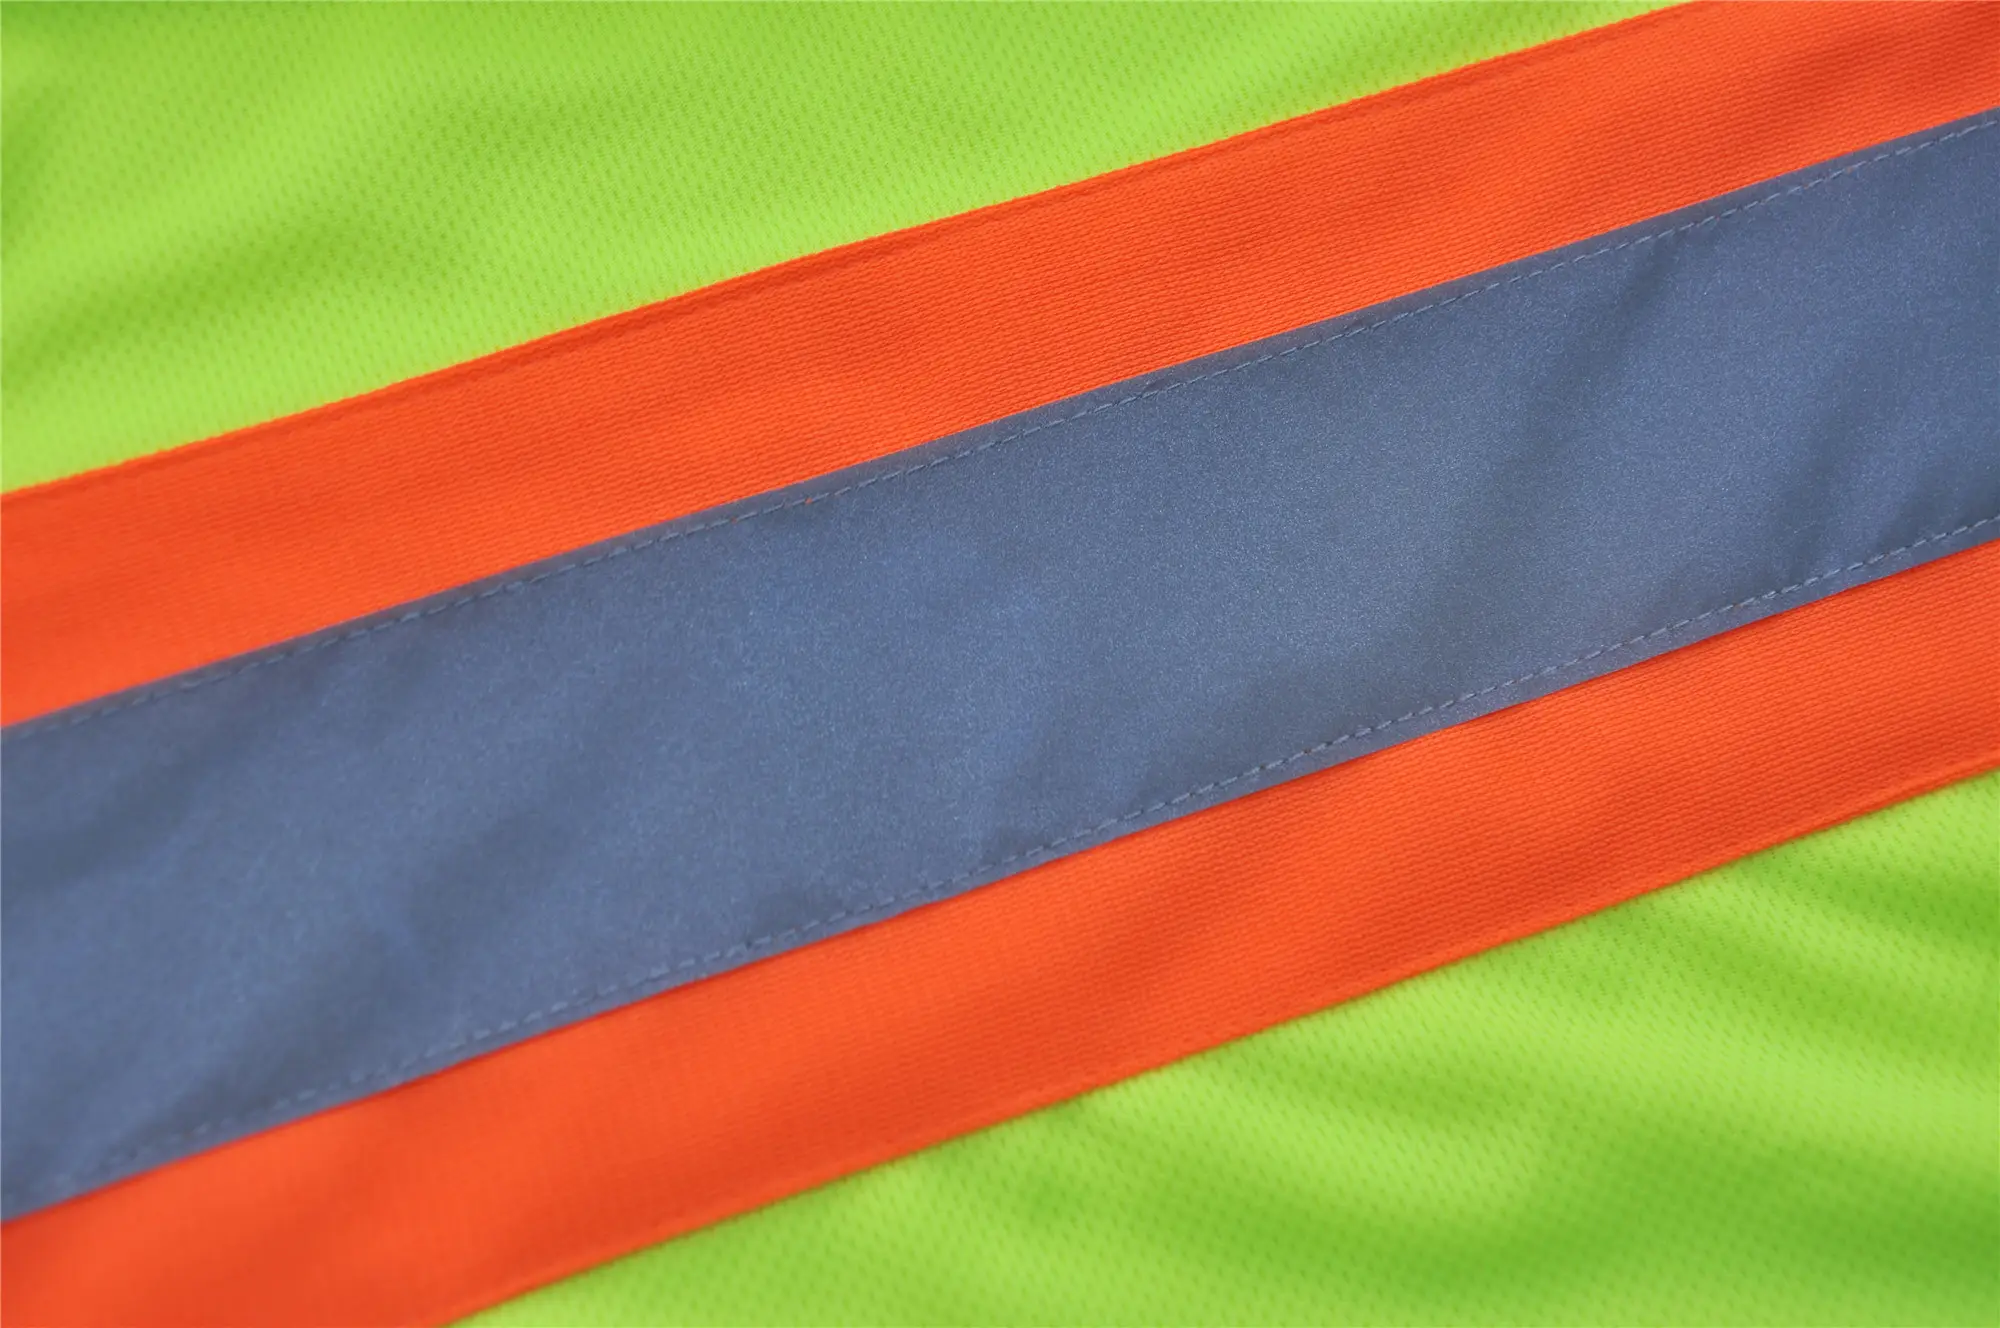 100% Cotton/Polyester Hi vis Orange Reflective Safety Shirt with Knitted Reflective tape